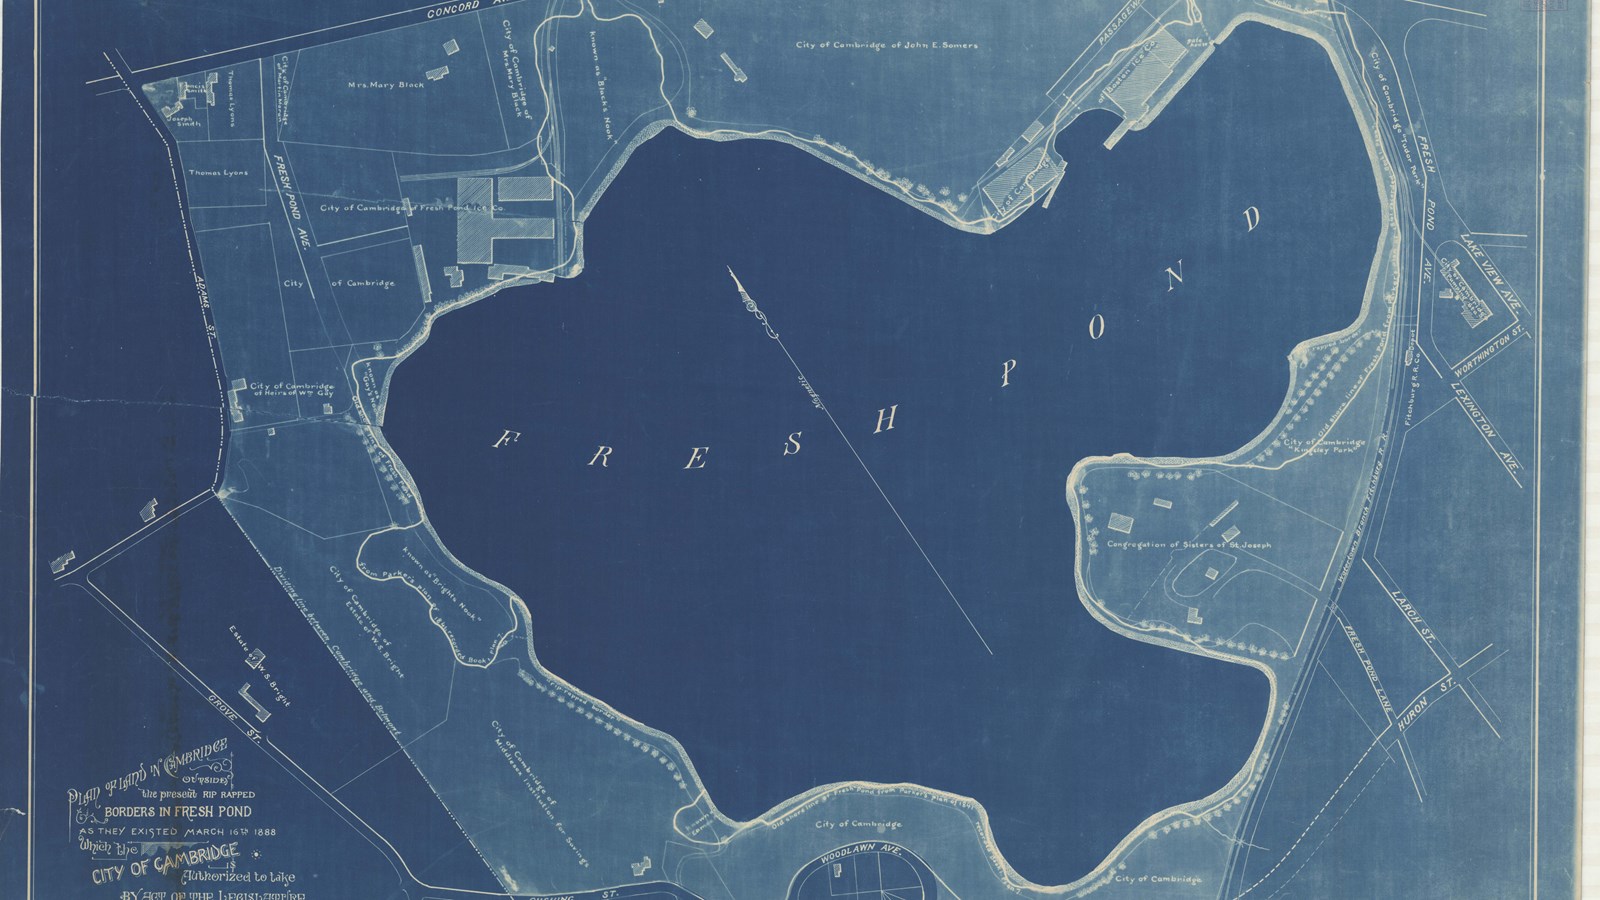 Blueprint of large body of water with some buildings and roads around